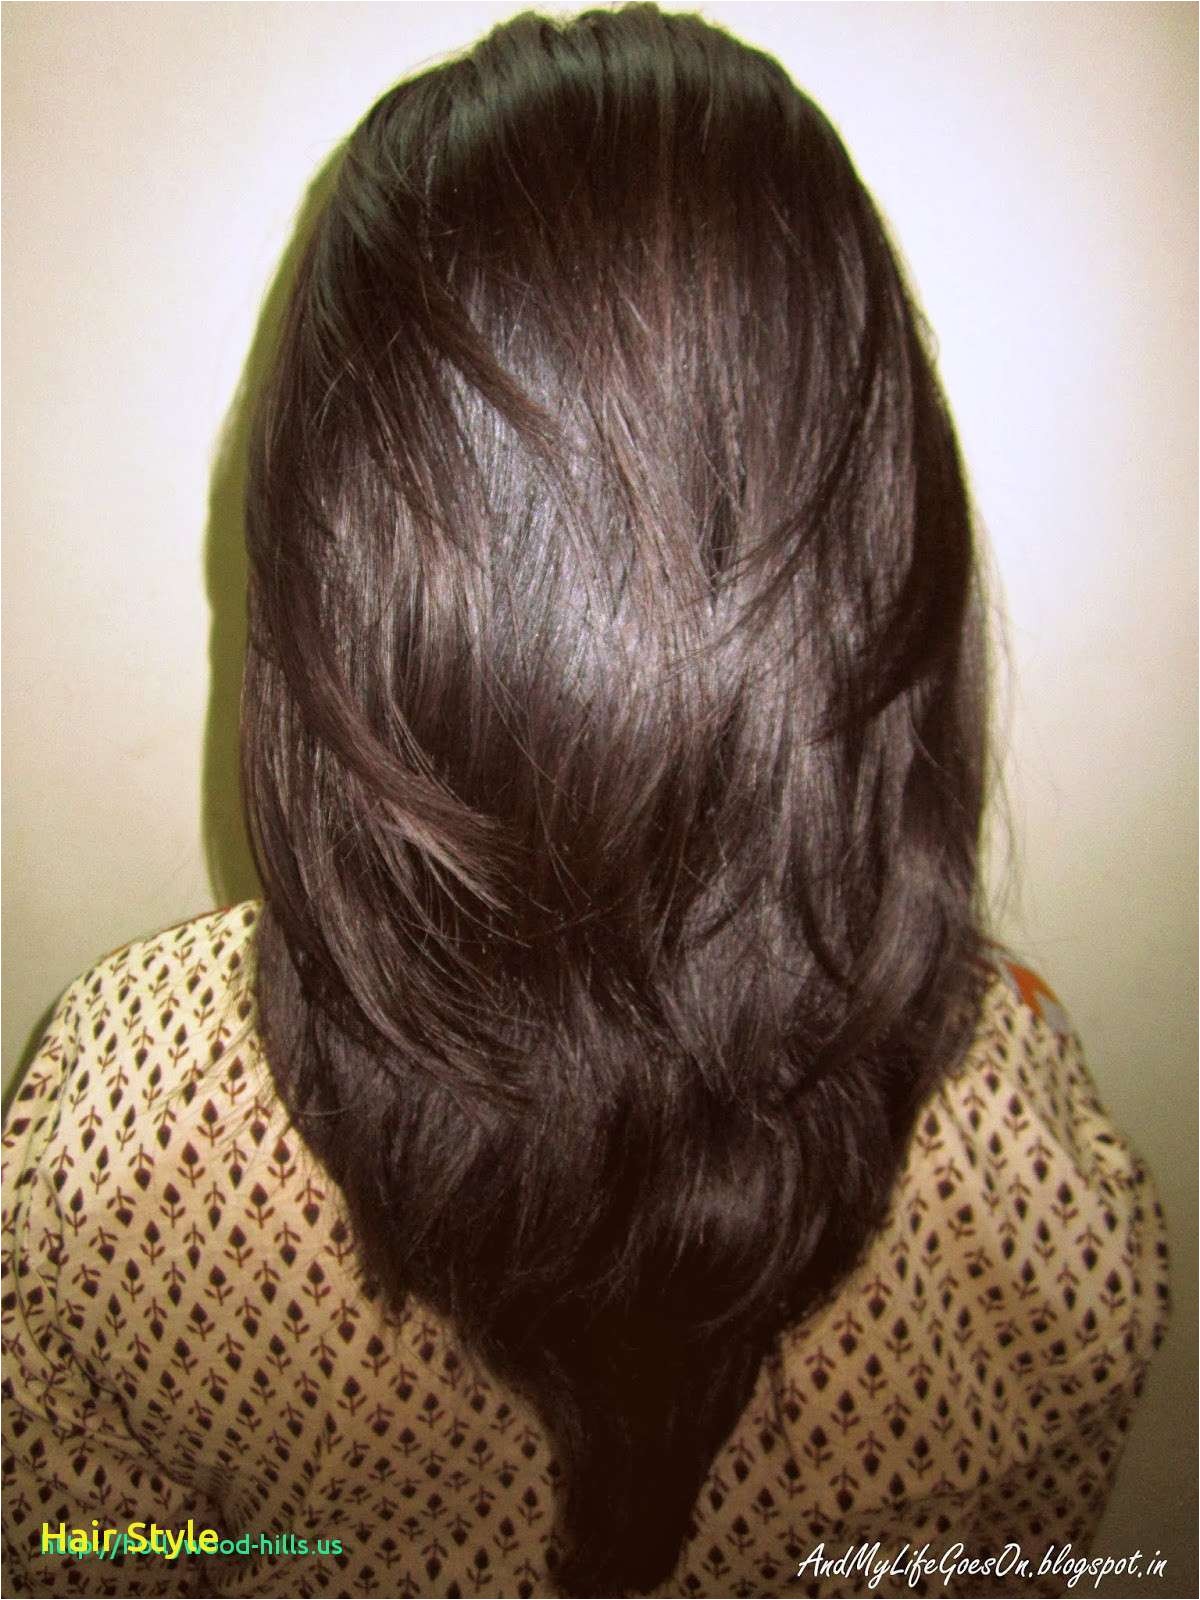 new hairstyles for long hair best step cut hairstyle for straight hair back view